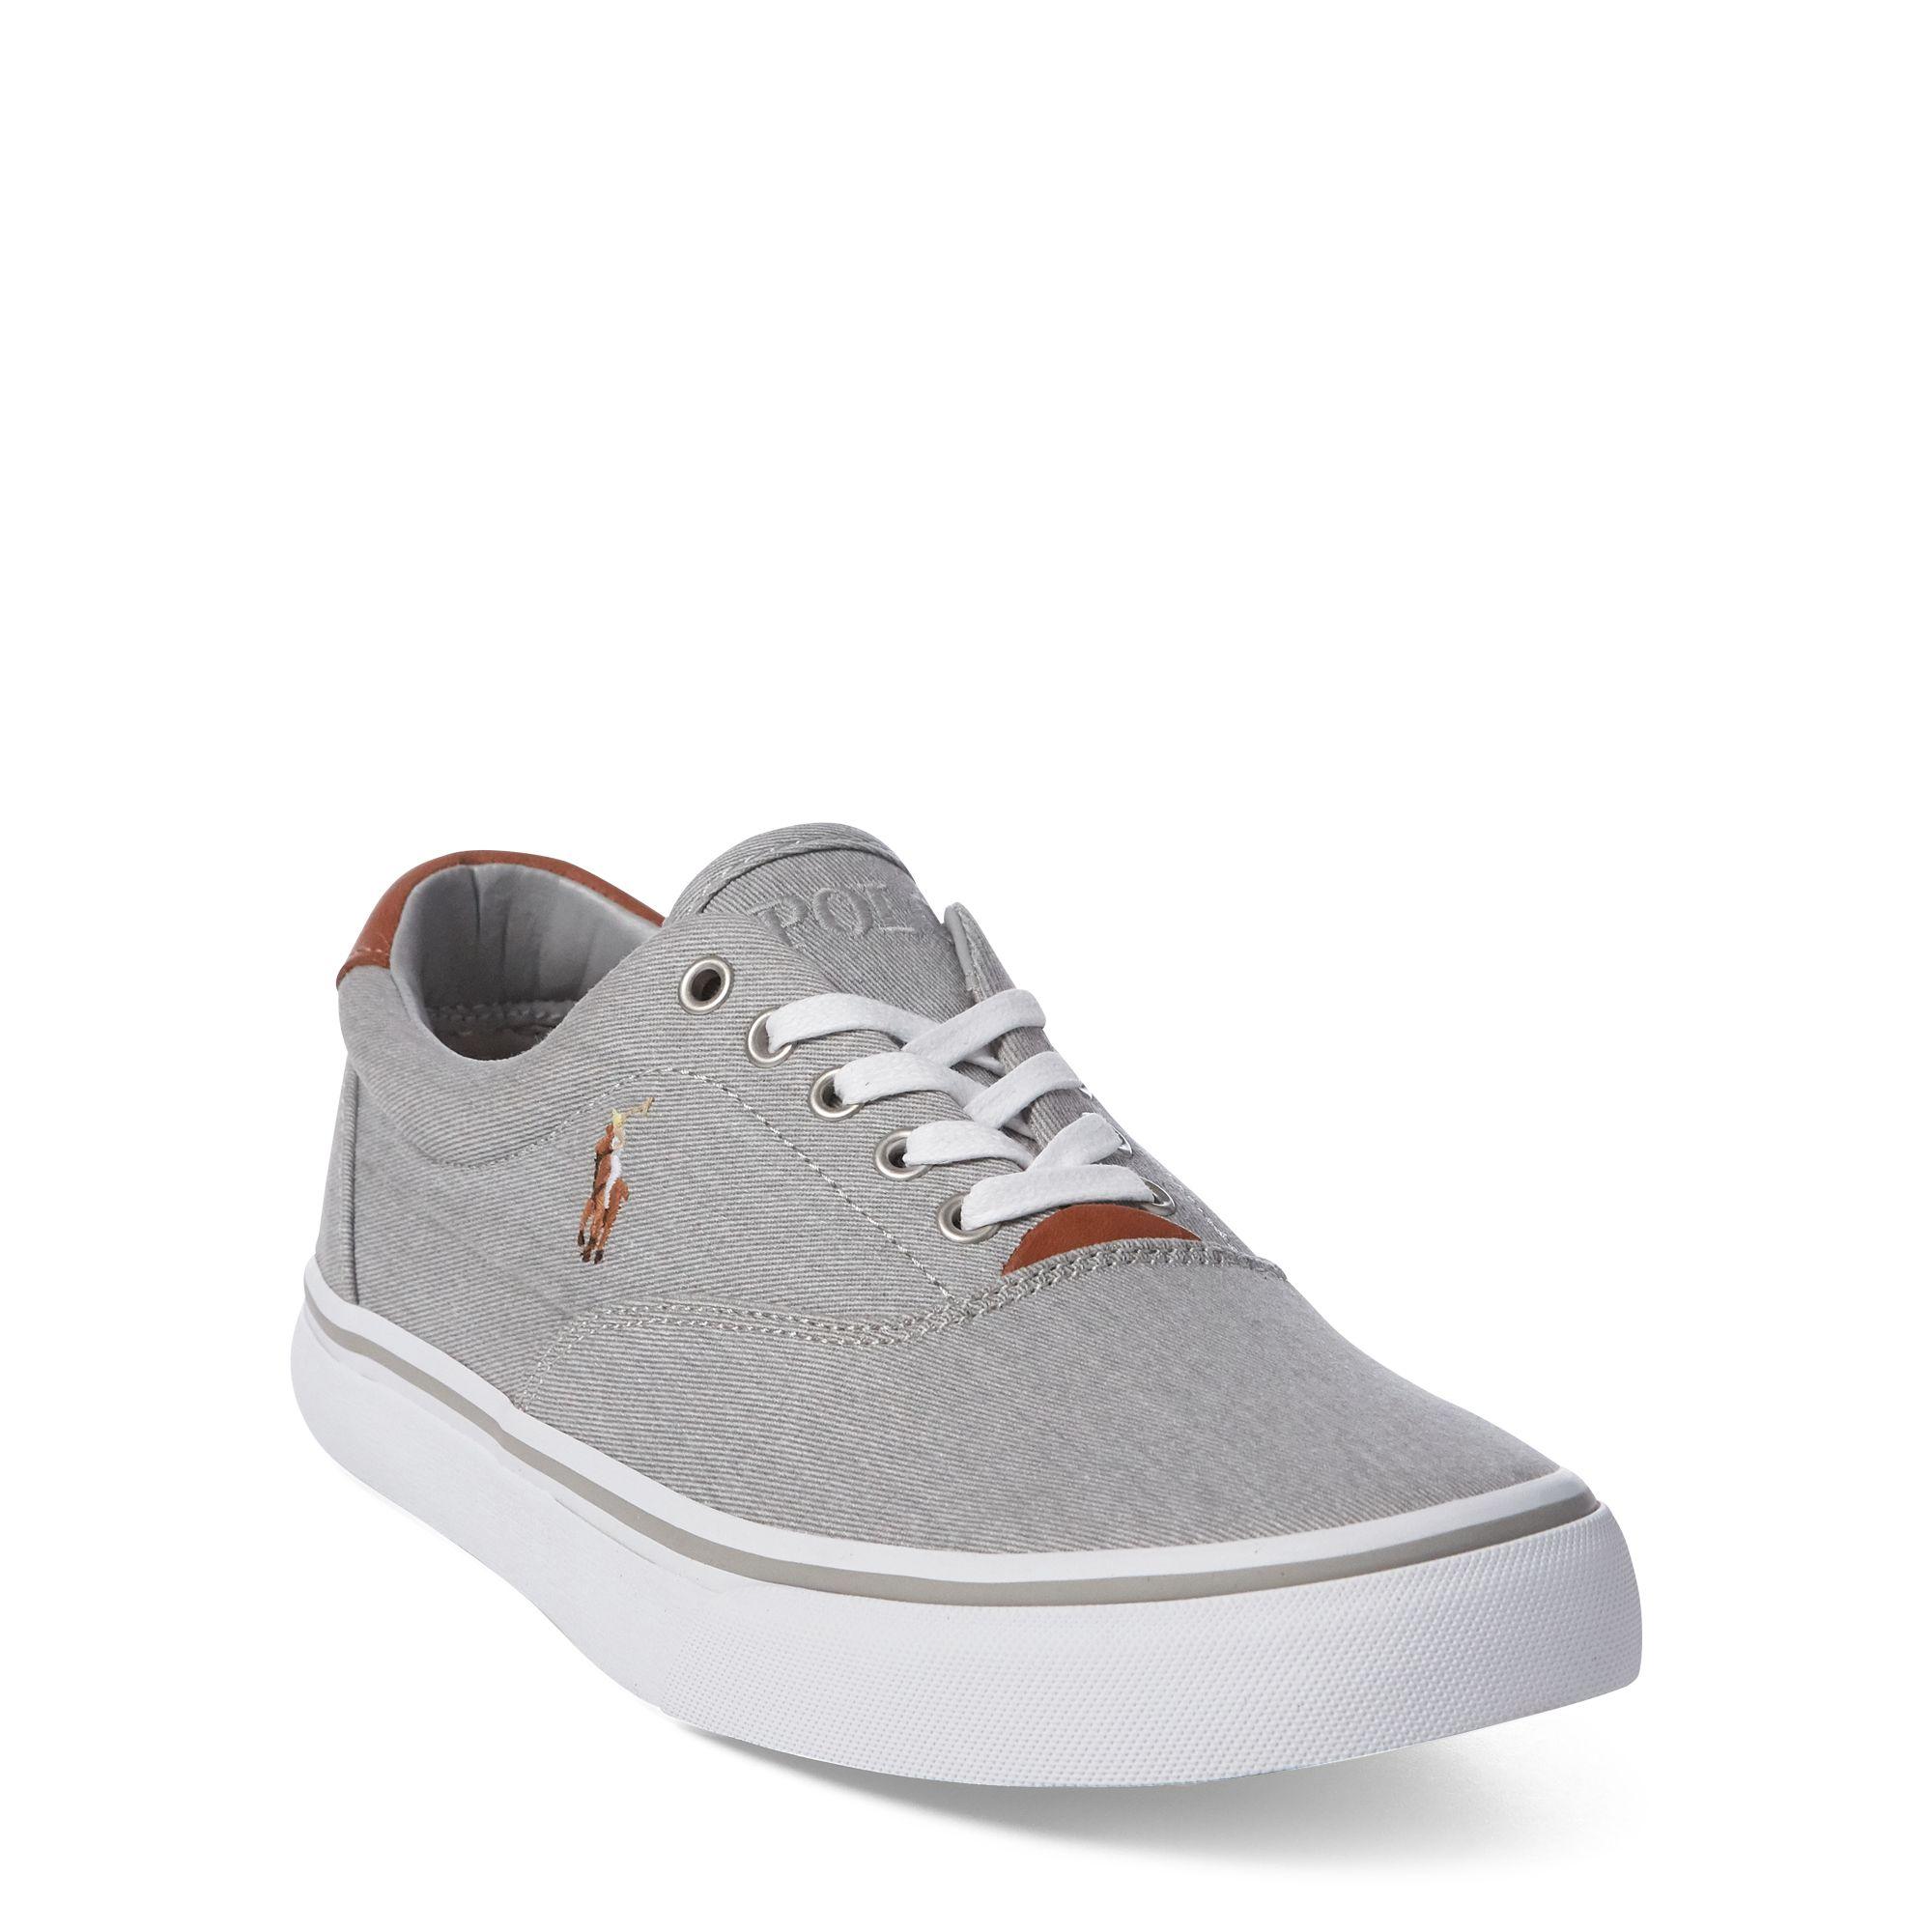 Polo Ralph Lauren Canvas Thorton Washed Twill Sneaker in Soft Grey ...